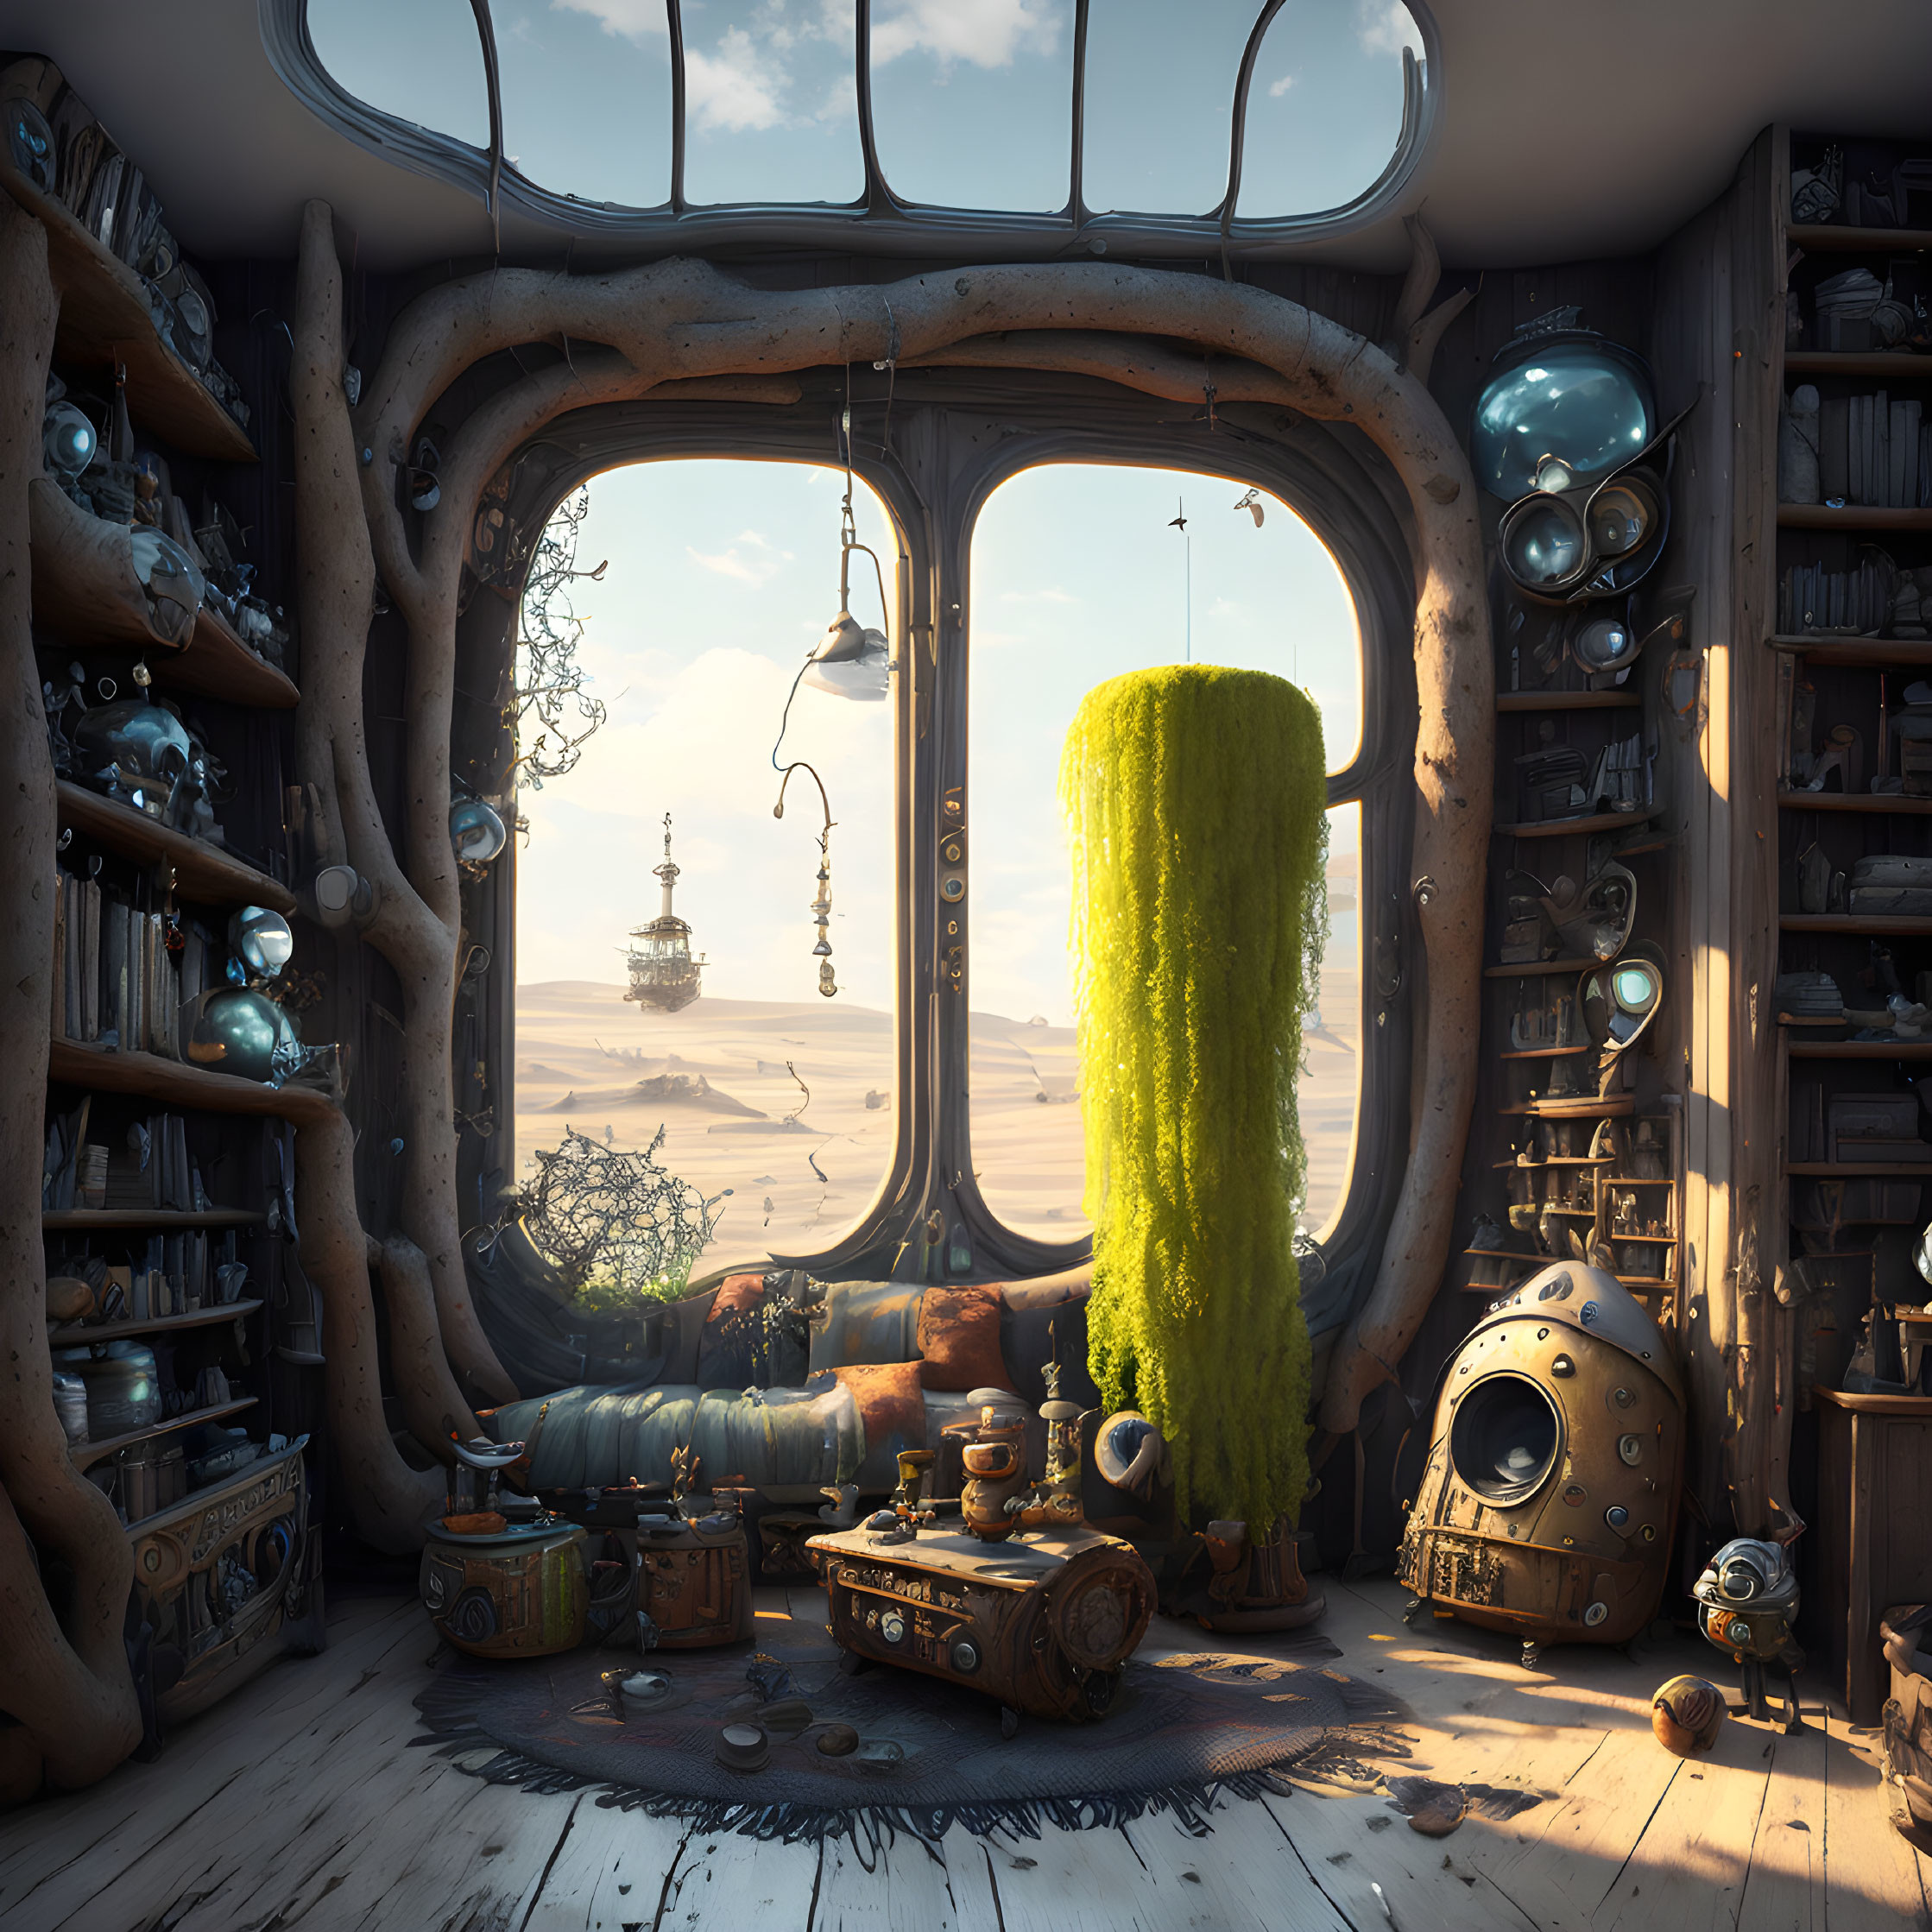 Steampunk interior with gadgets, green alcove, desert view, robotic figure